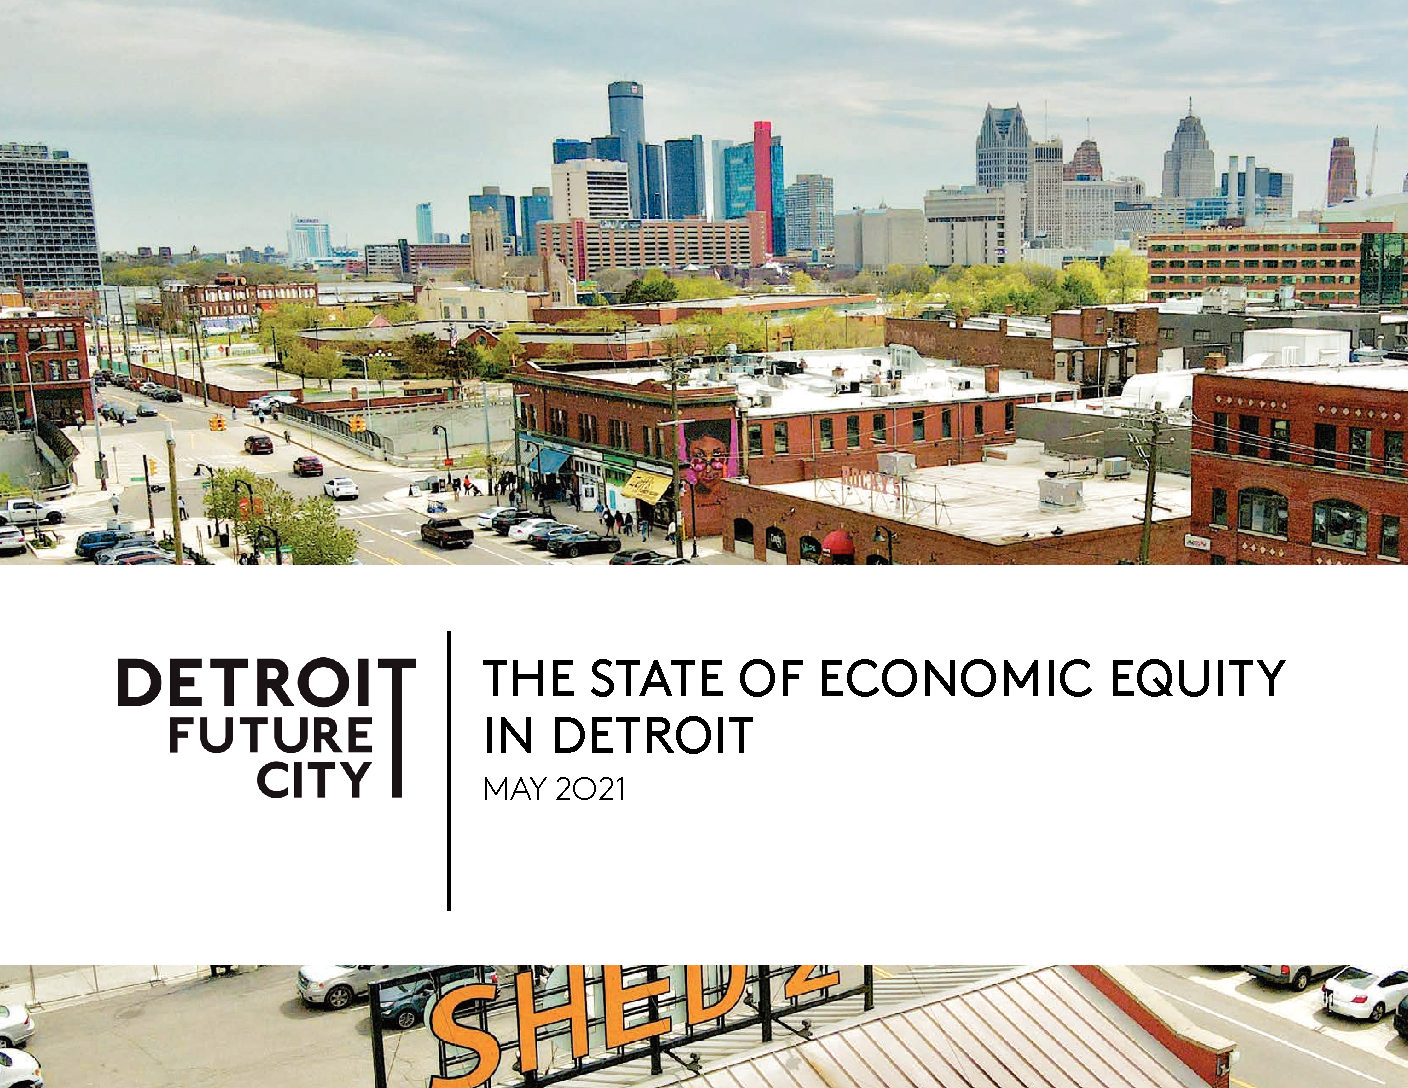 6/6/21: American Black Journal – Detroit Future City / Discover your Spark